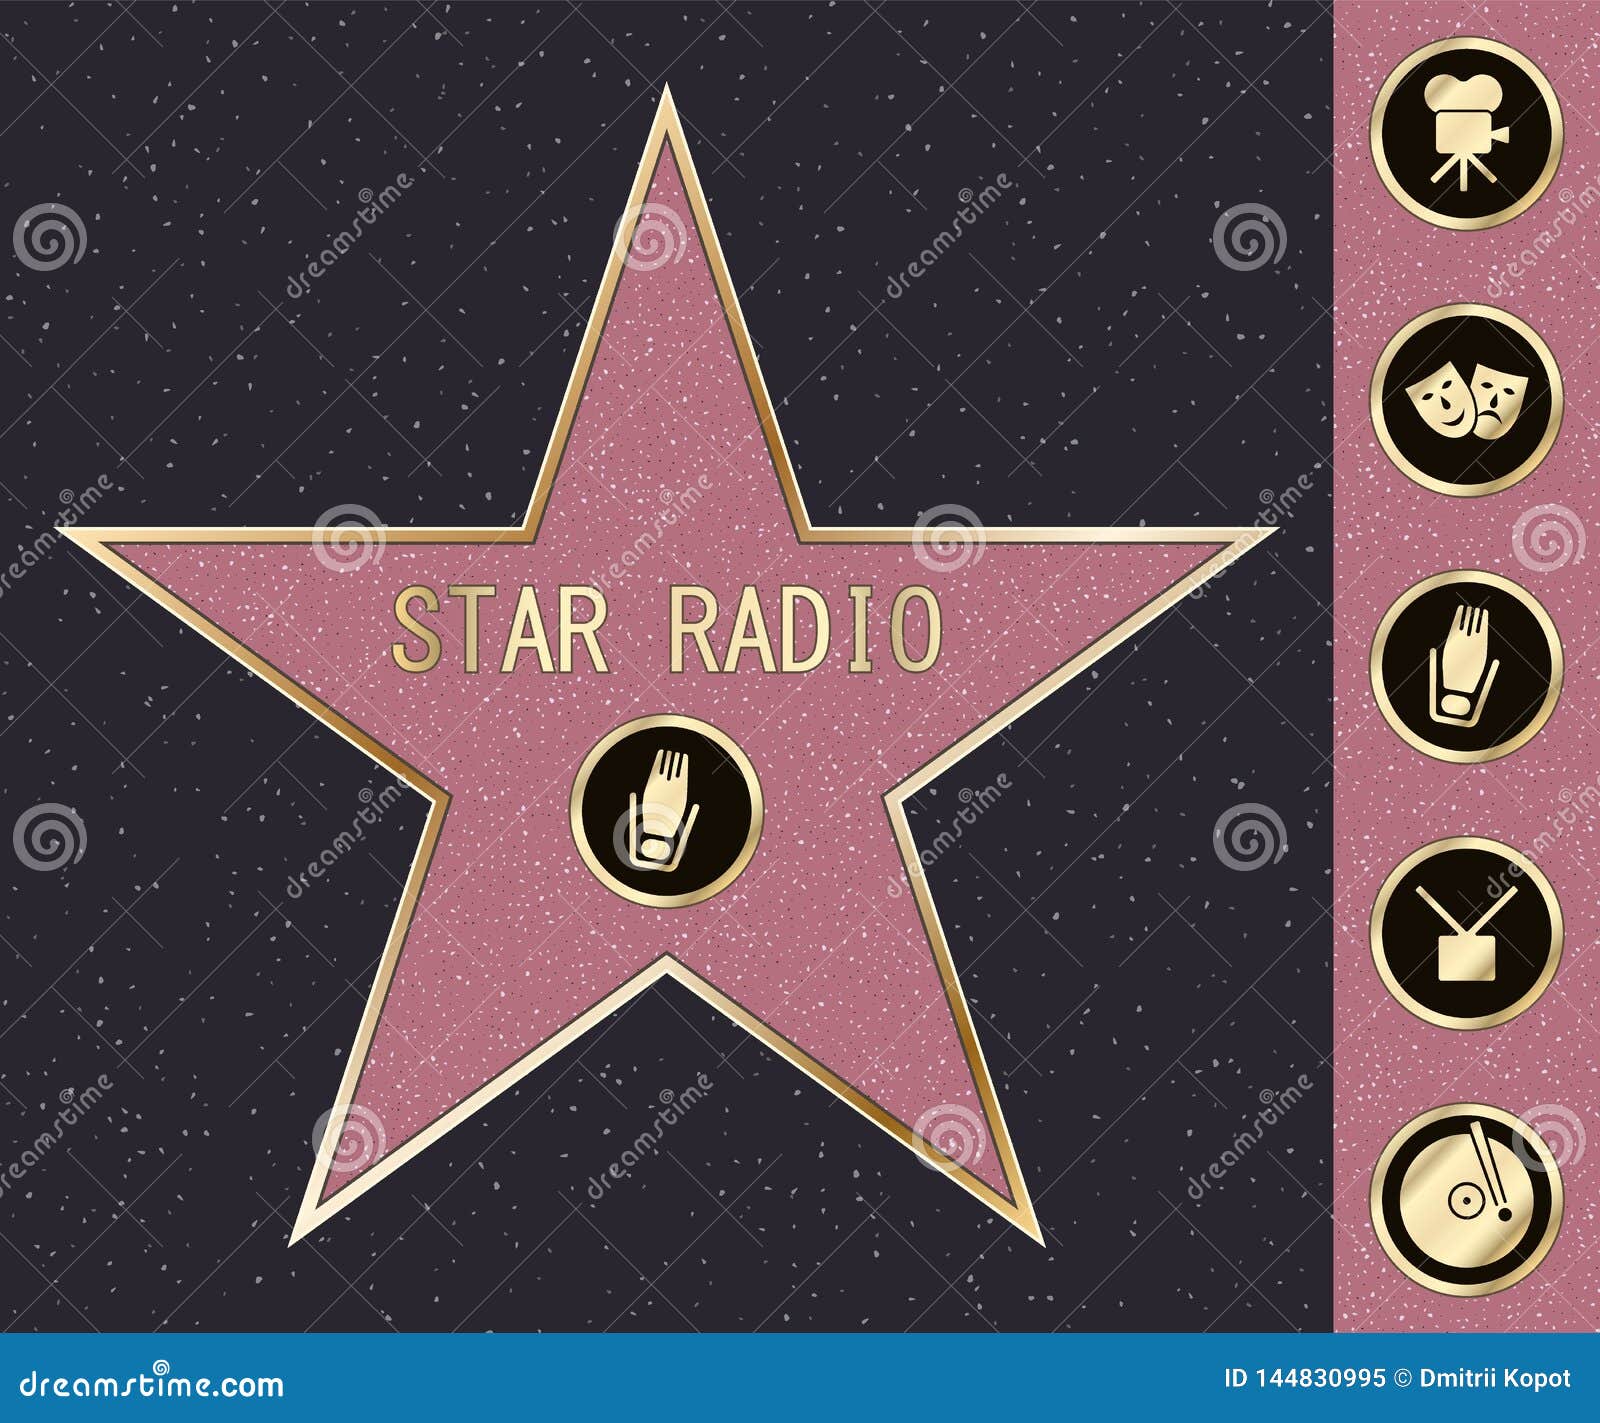 Hollywood Star Template Stock Illustrations 1 015 Hollywood Star Template Stock Illustrations Vectors Clipart Dreamstime